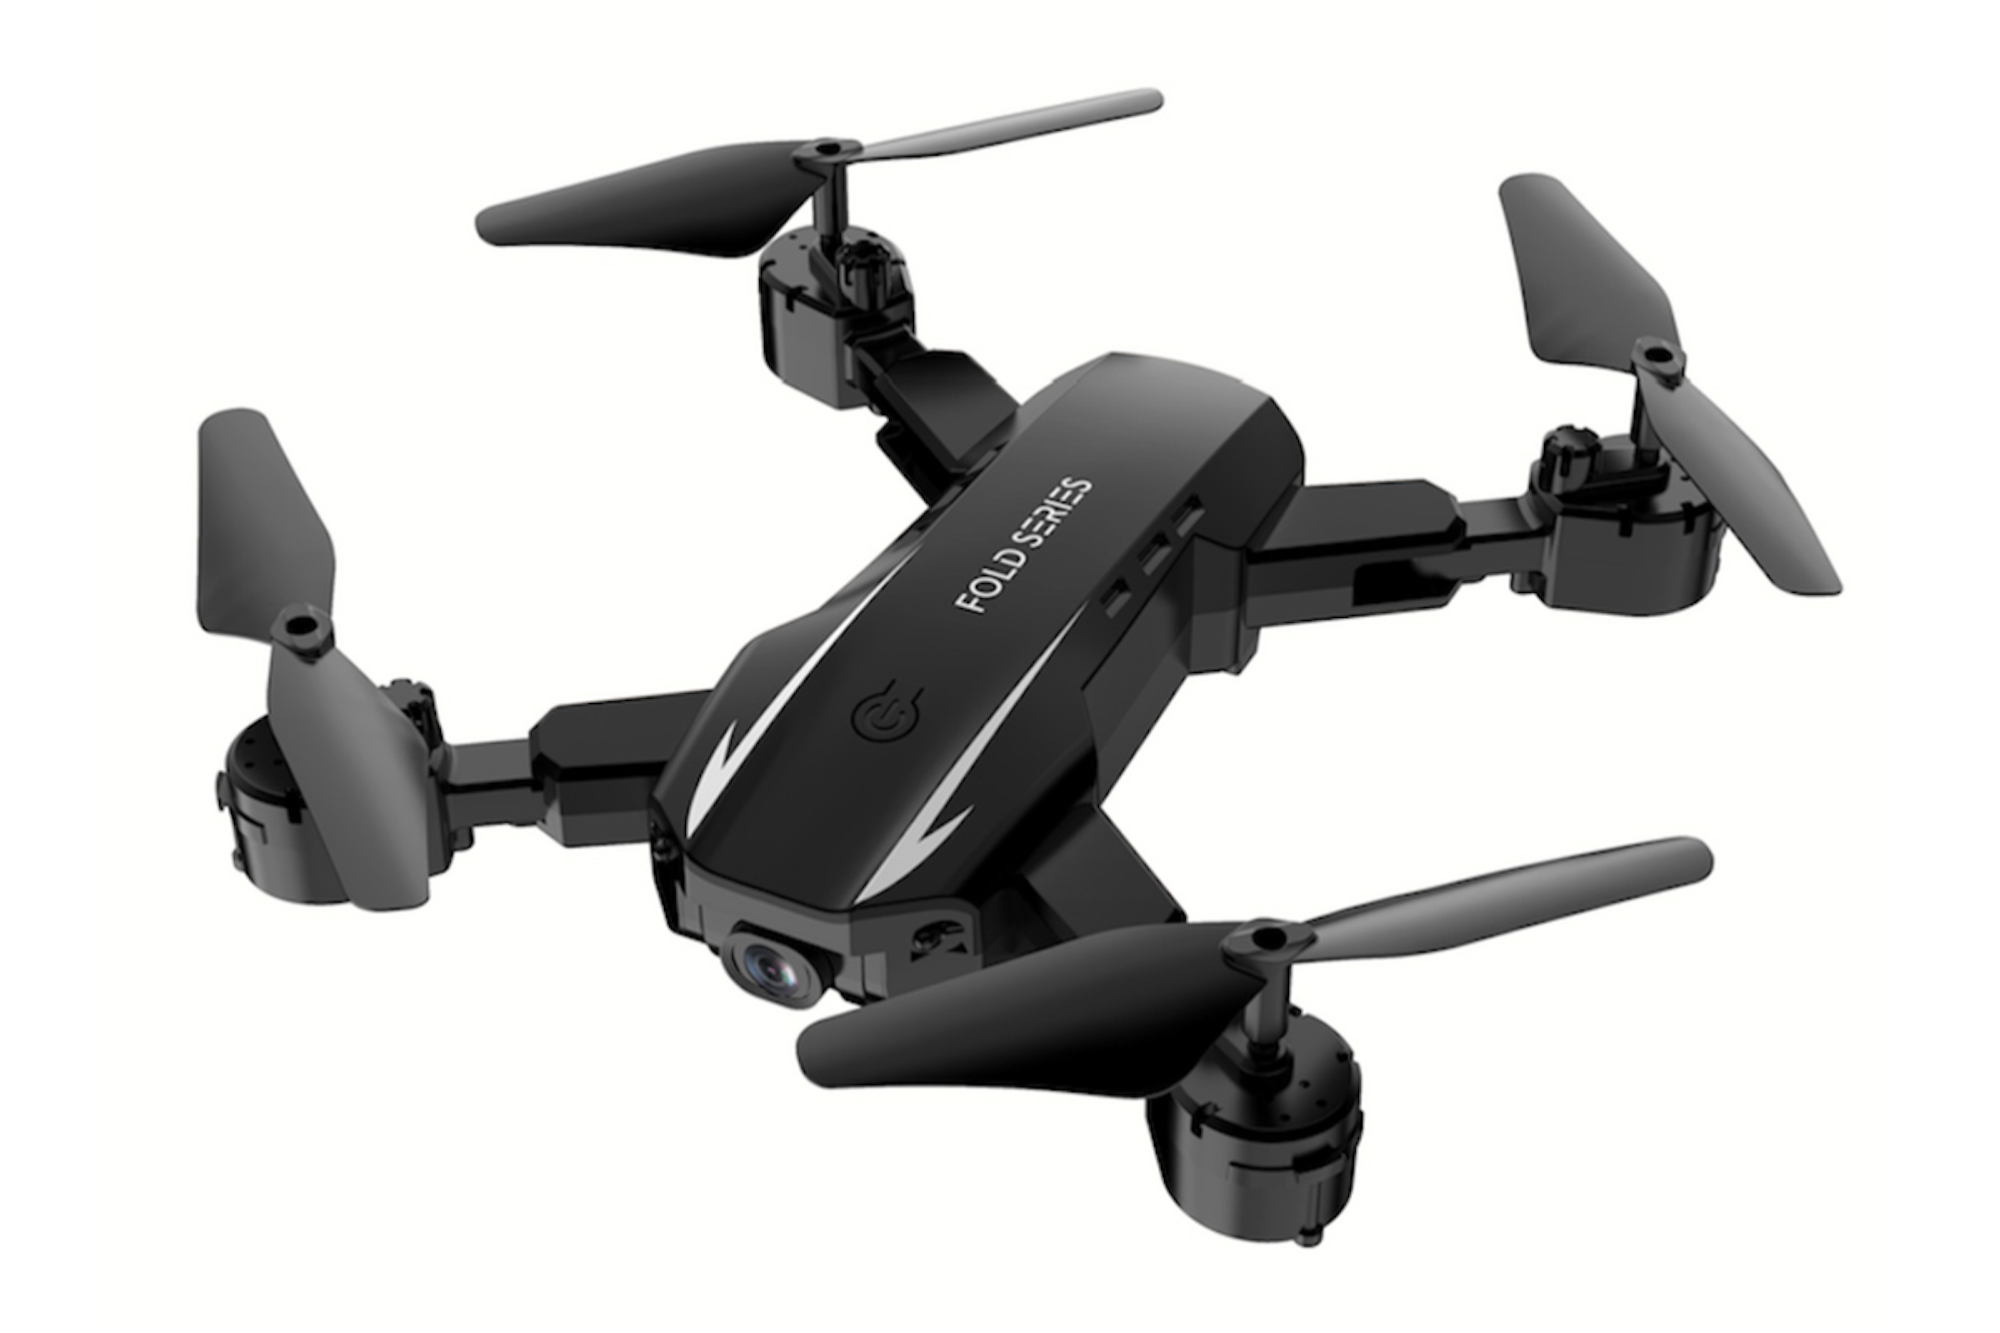 Set an Extra 20% on This Drone and Eradicate Your Team’s Squawk material Sky-High